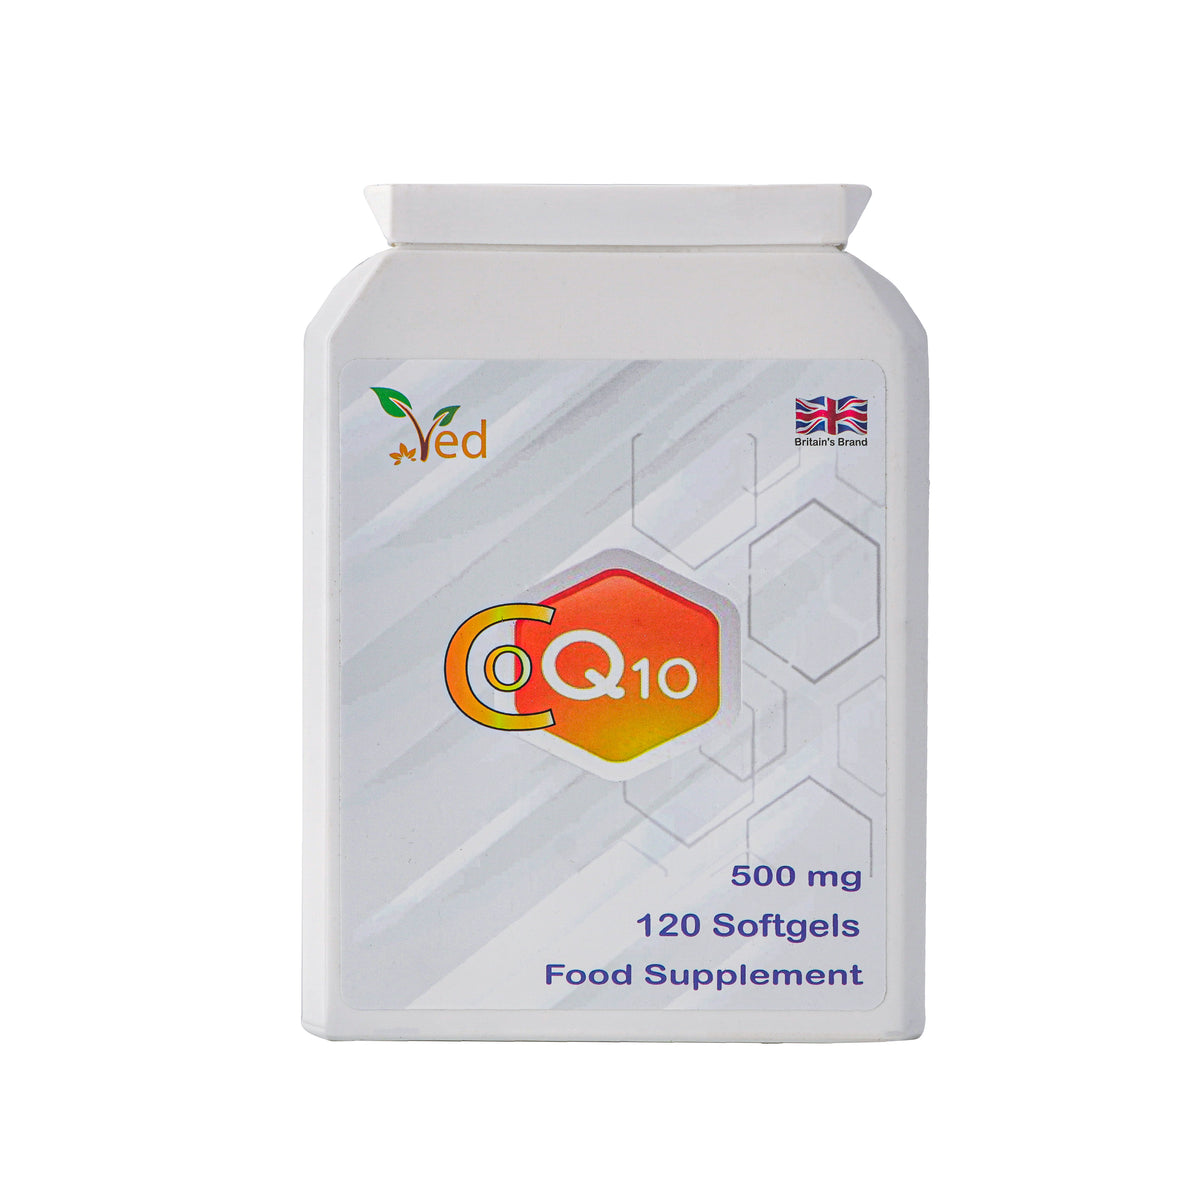 Ved's CoQ10 500mg | Co Enzyme Q10 | Highest Strength | Naturally Fermented Ubiquinone Coenzyme | Superior Natural Formula | 500mg 120 Softgels| 4 Months Supply